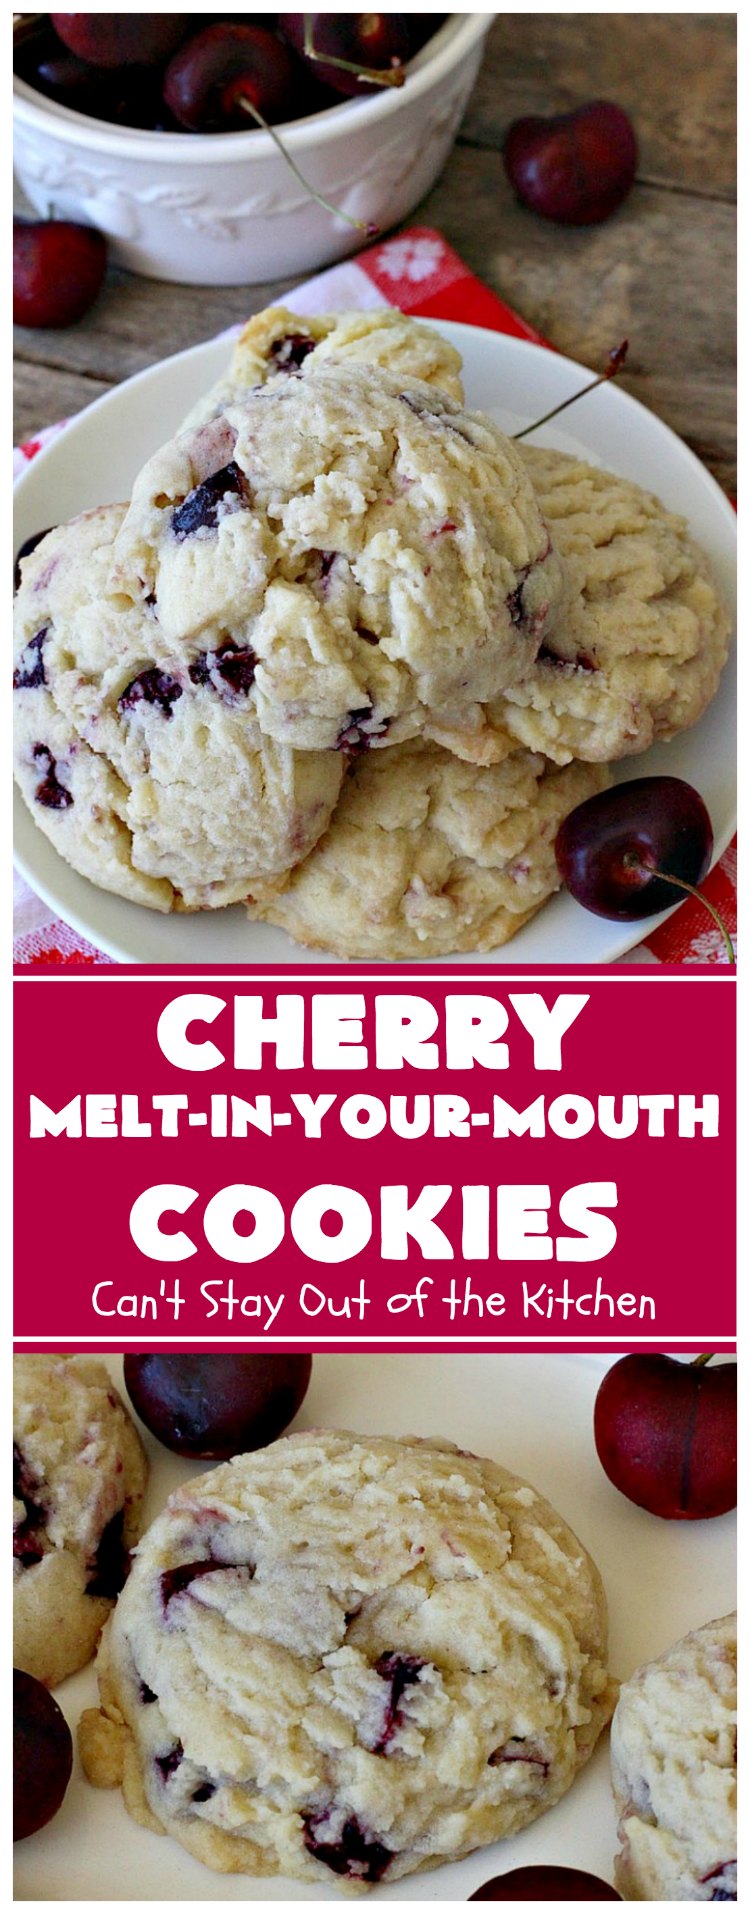 Cherry Melt-In-Your-Mouth Cookies | Can't Stay Out of the Kitchen